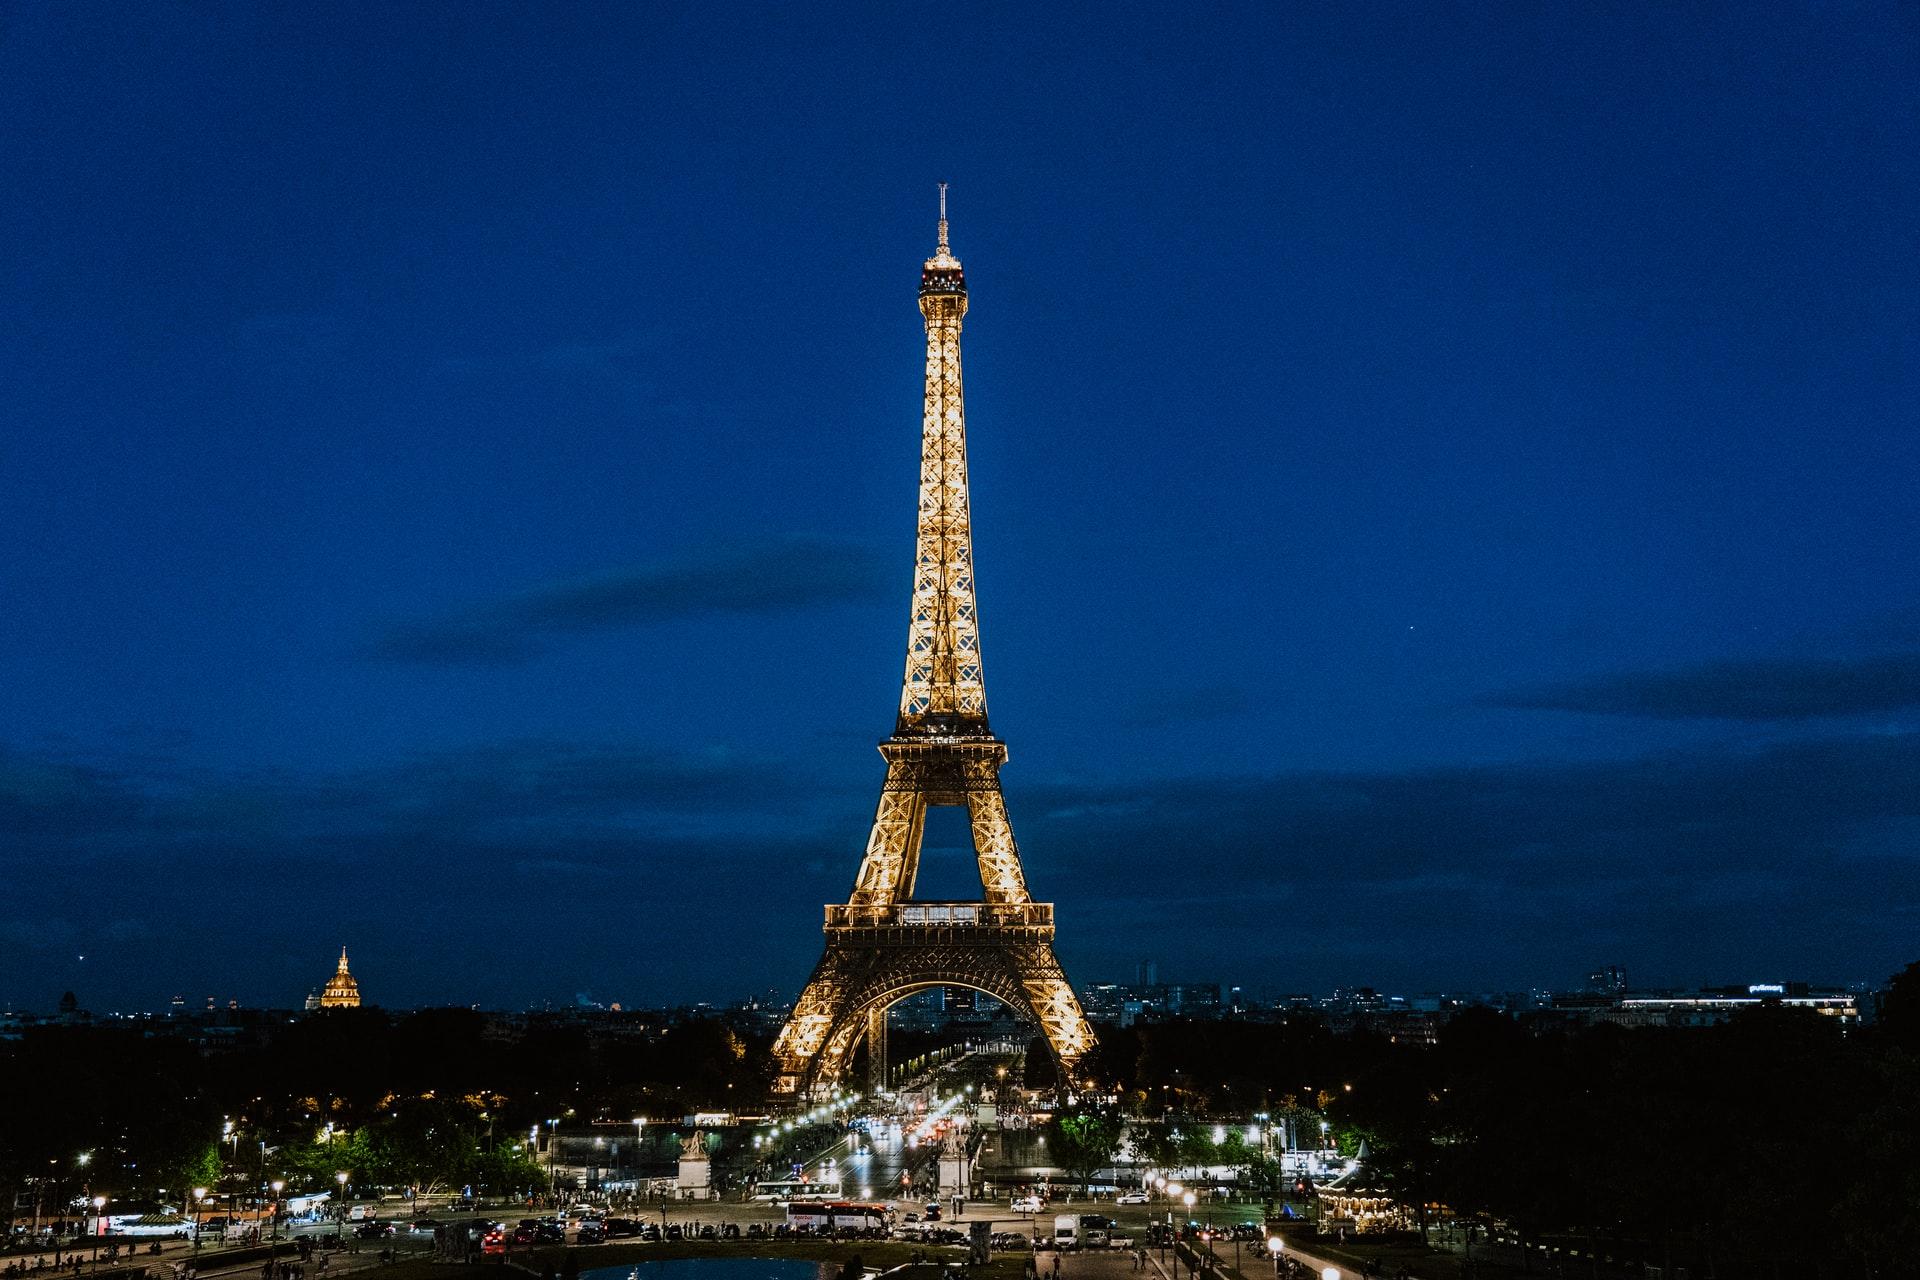 A view of the illuminated Eiffel Tower  at night